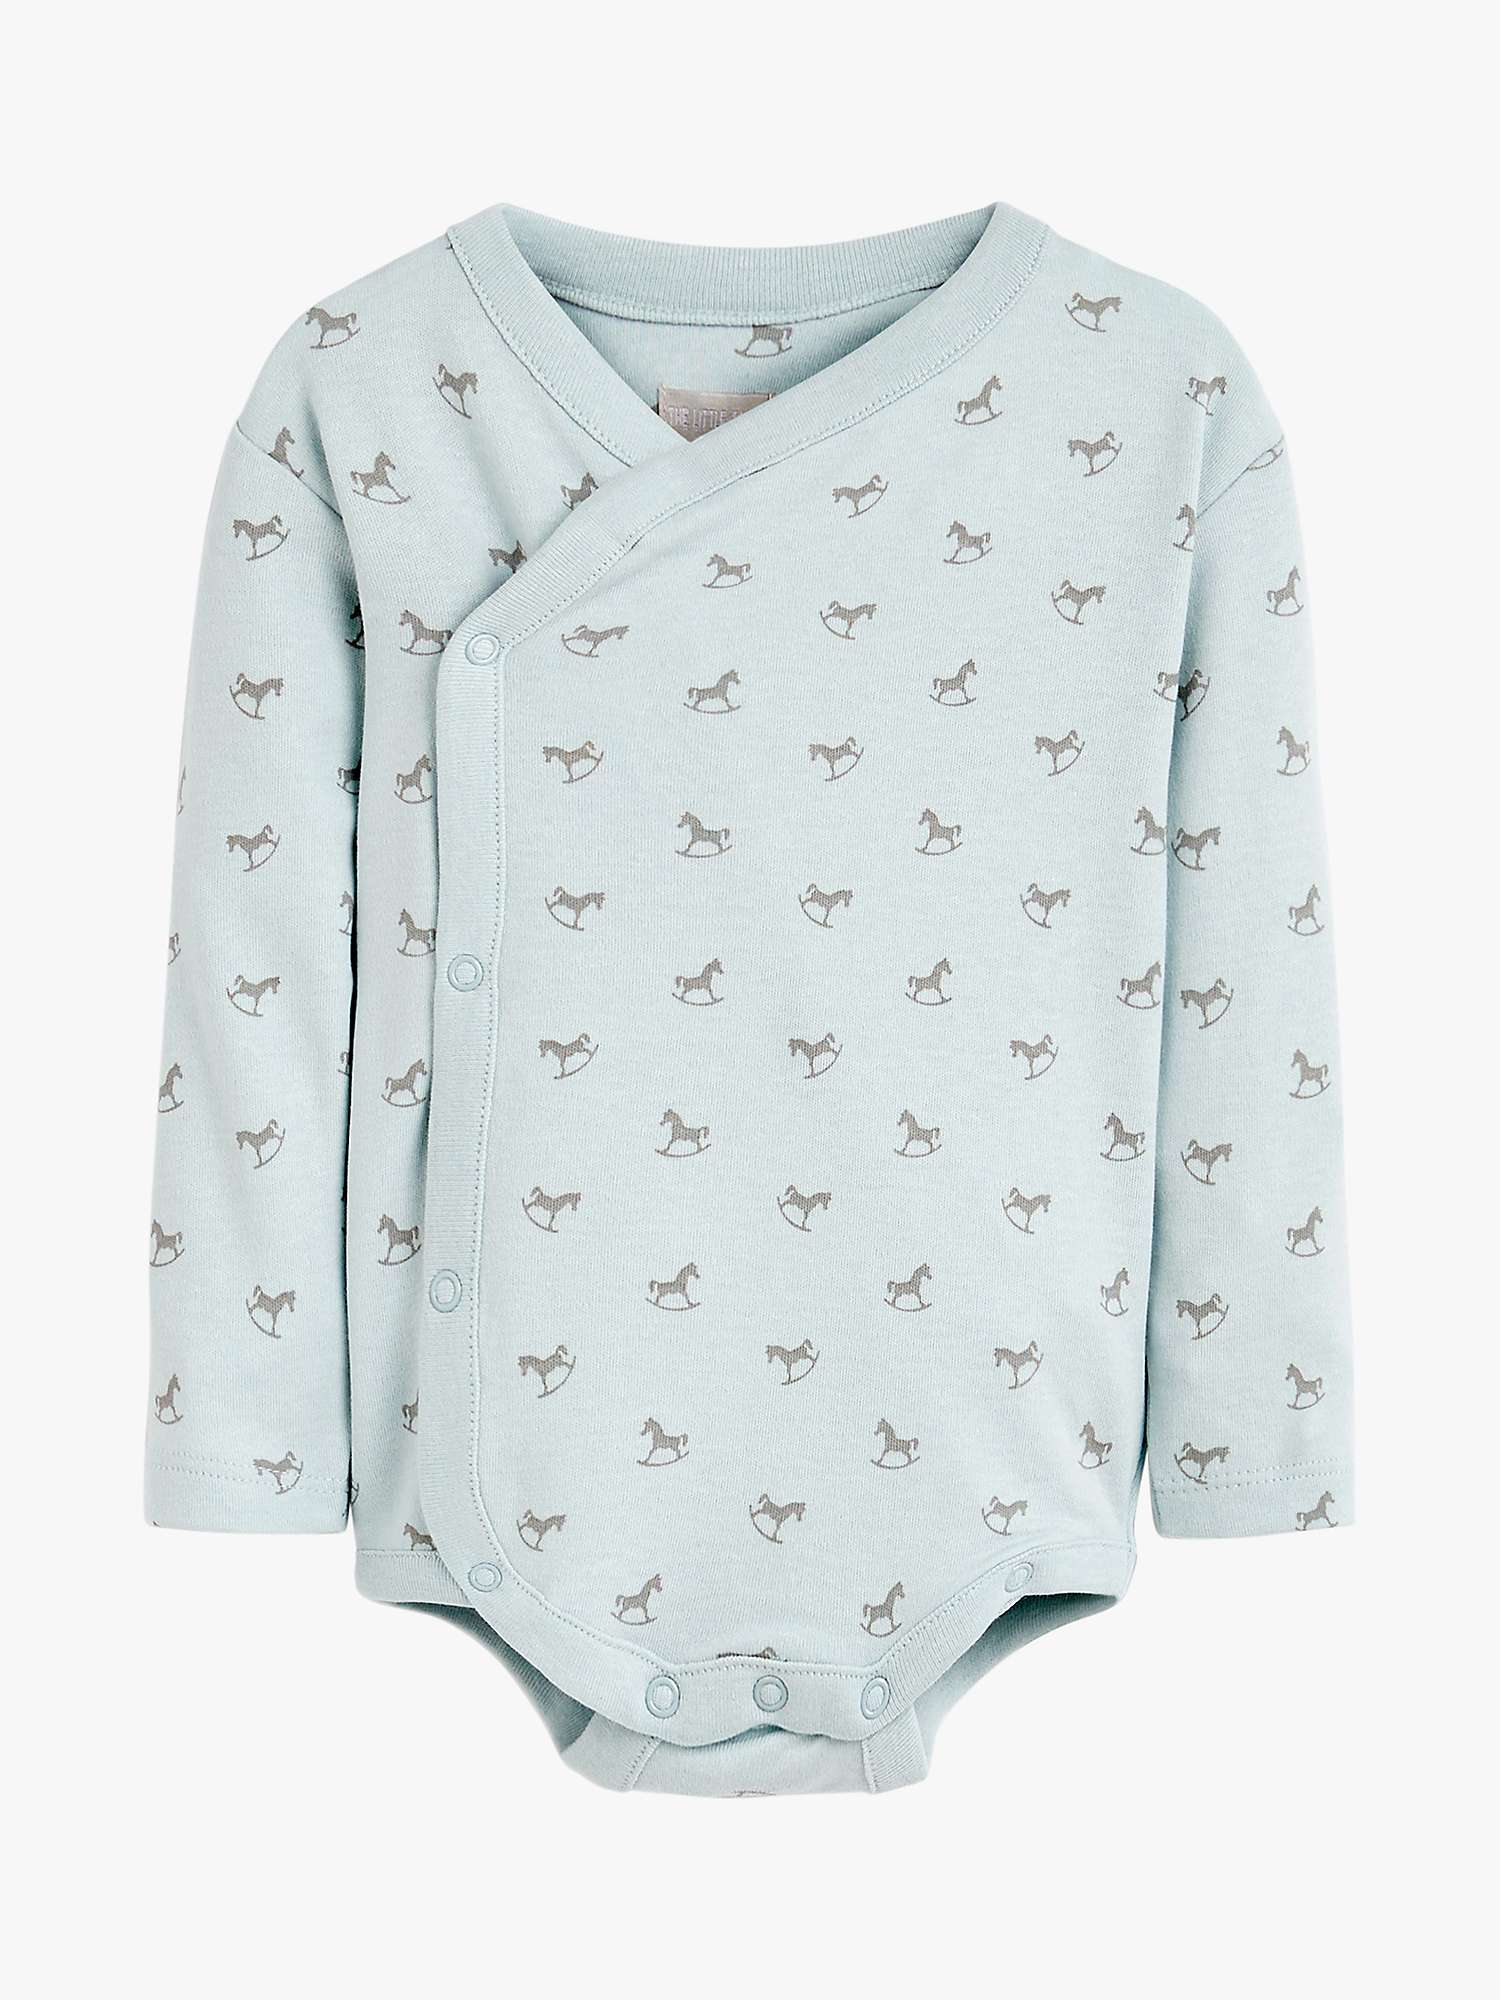 Buy The Little Tailor Baby Rocking Horse Print Long Sleeve Bodysuit, Pack of 2 Online at johnlewis.com